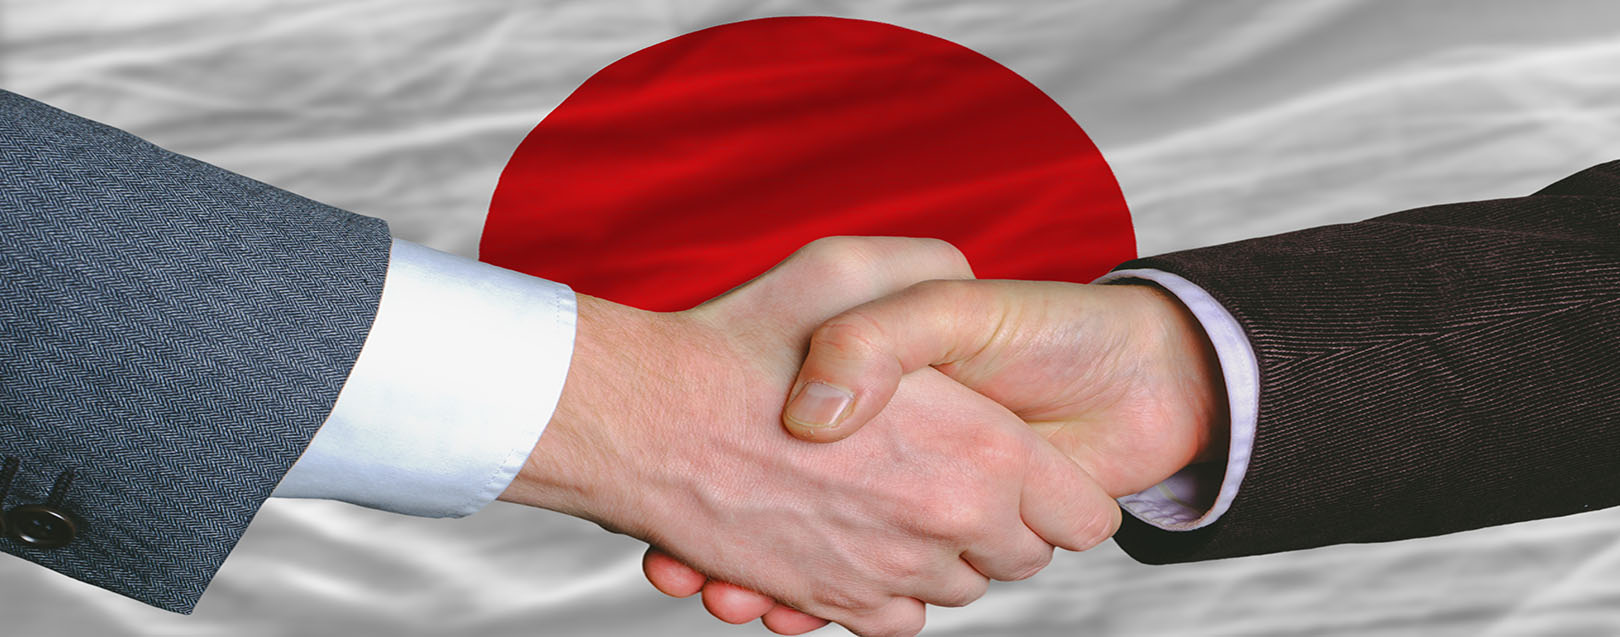 JETRO welcomes more Indian investment in Japan